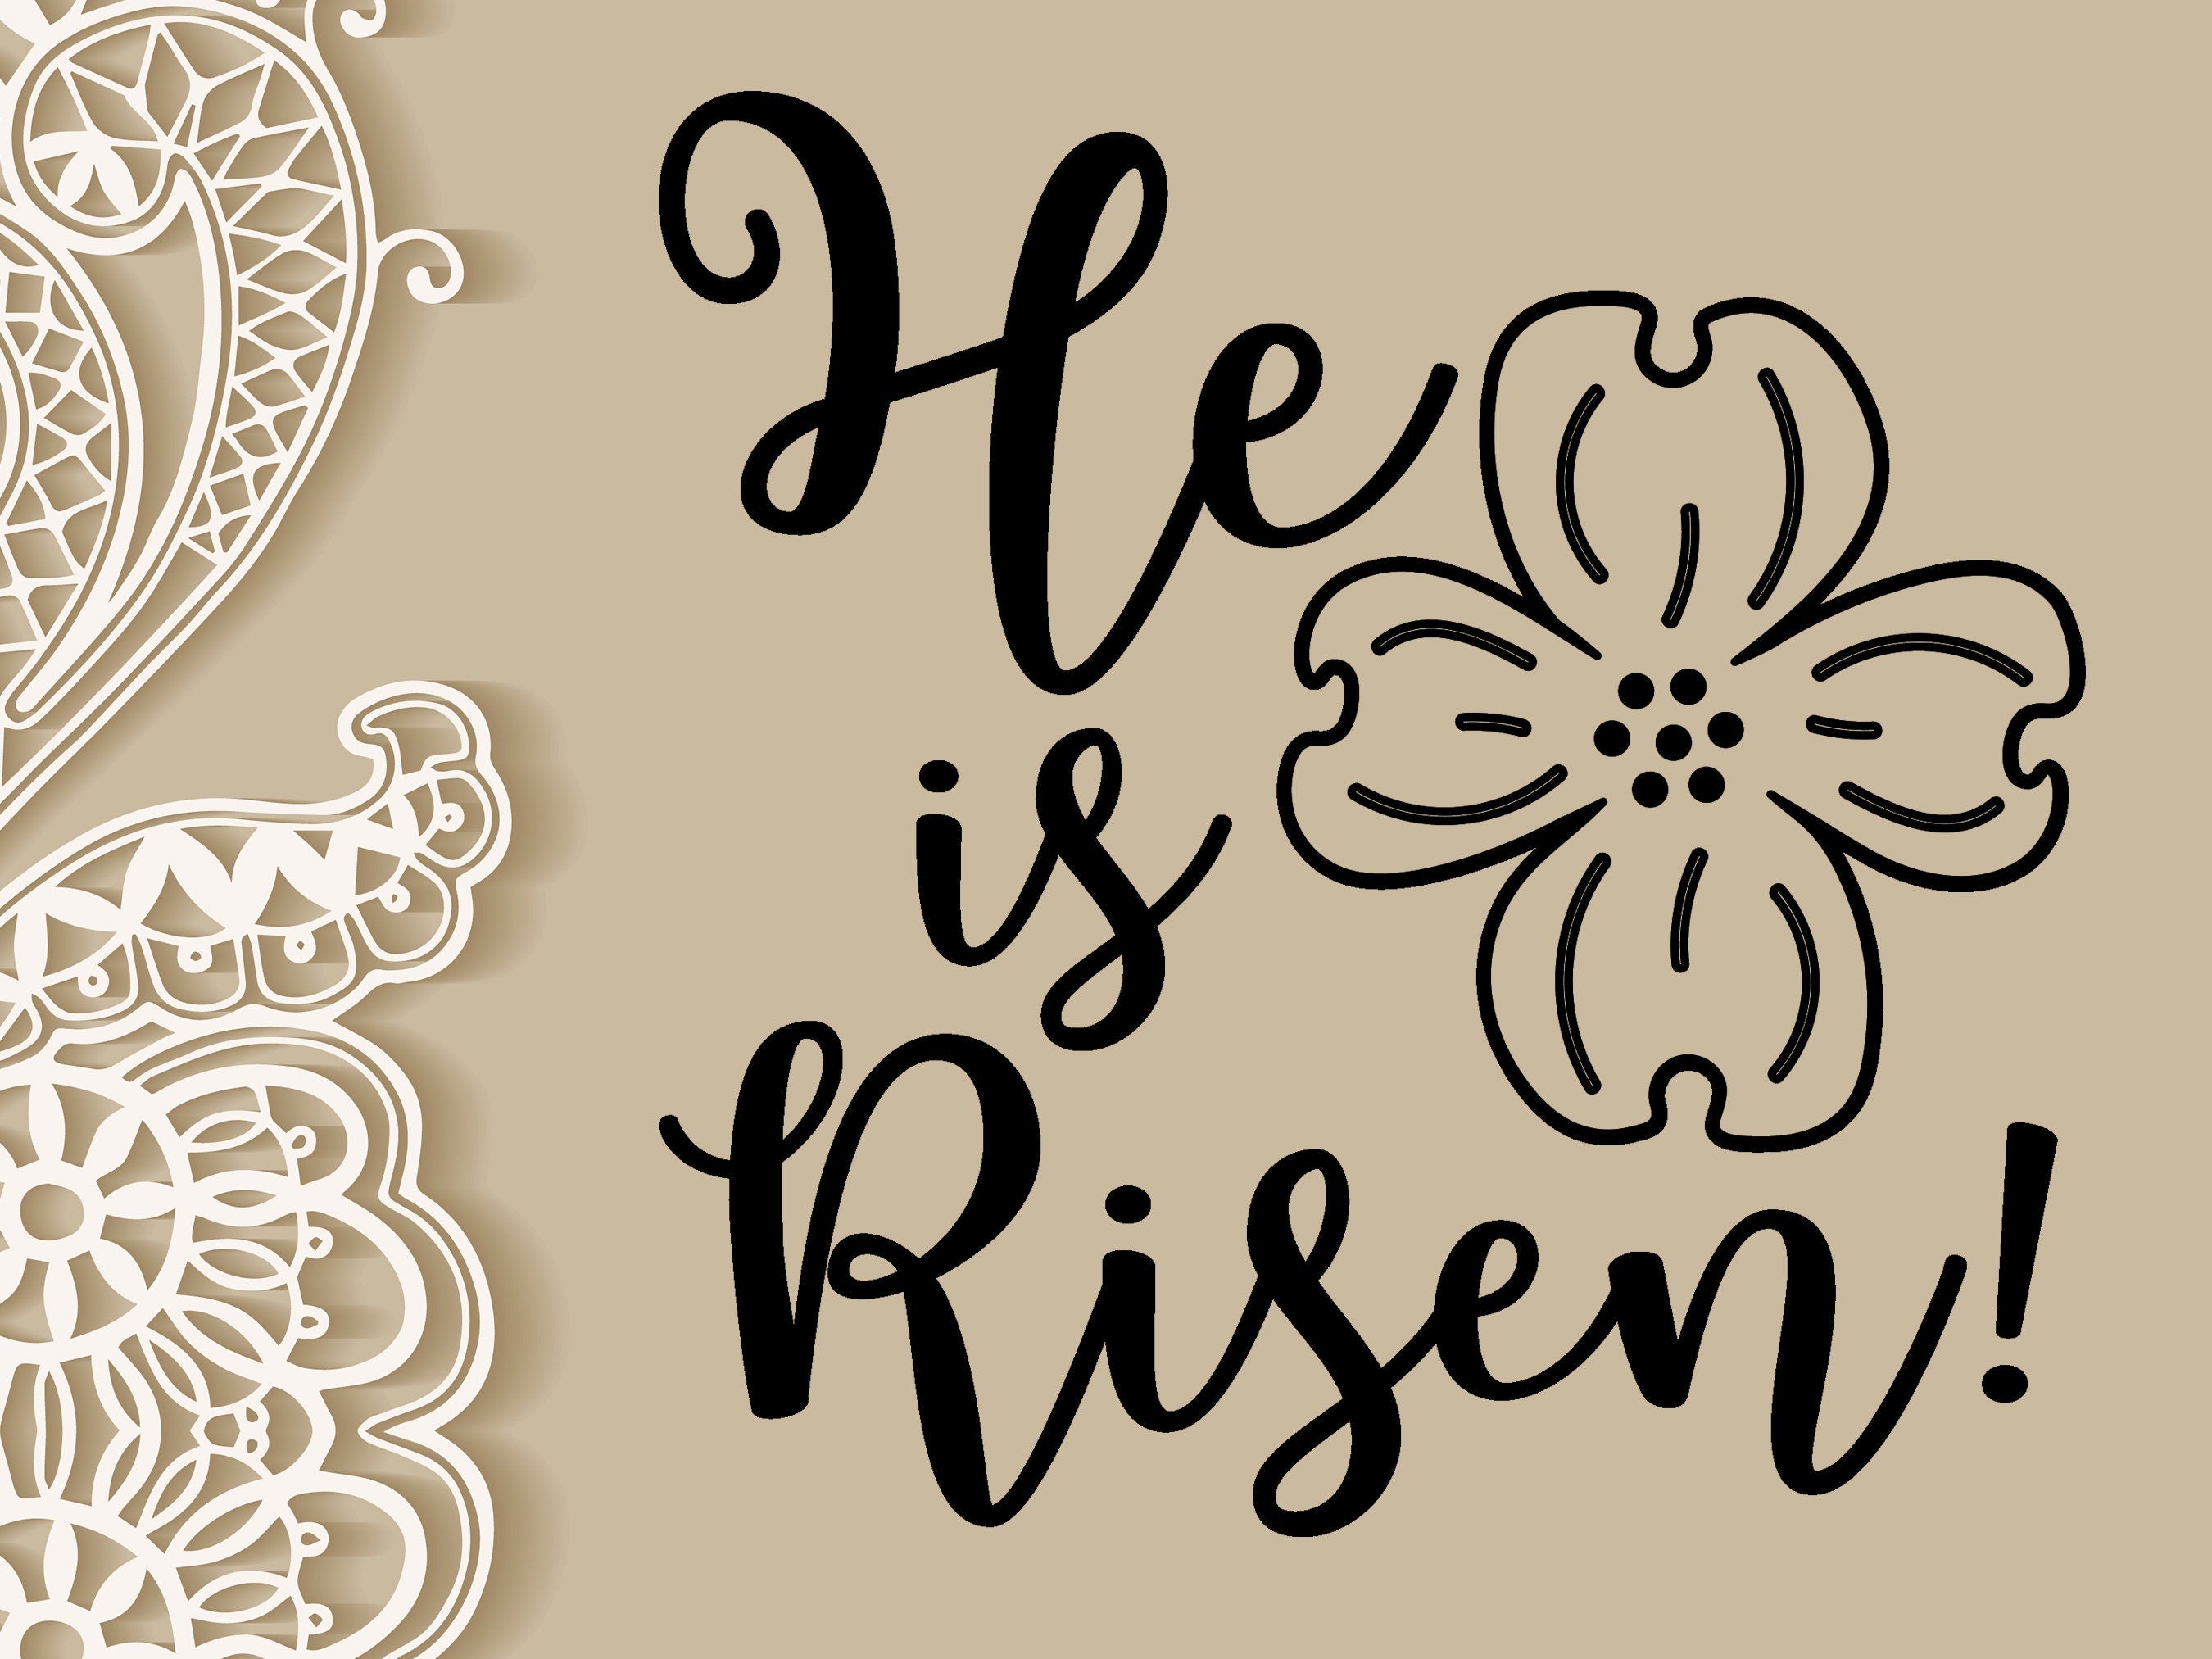 He is Risen with dogwood bloom clay stamp - Handbuild Clay Stamp - perfect size for mugs